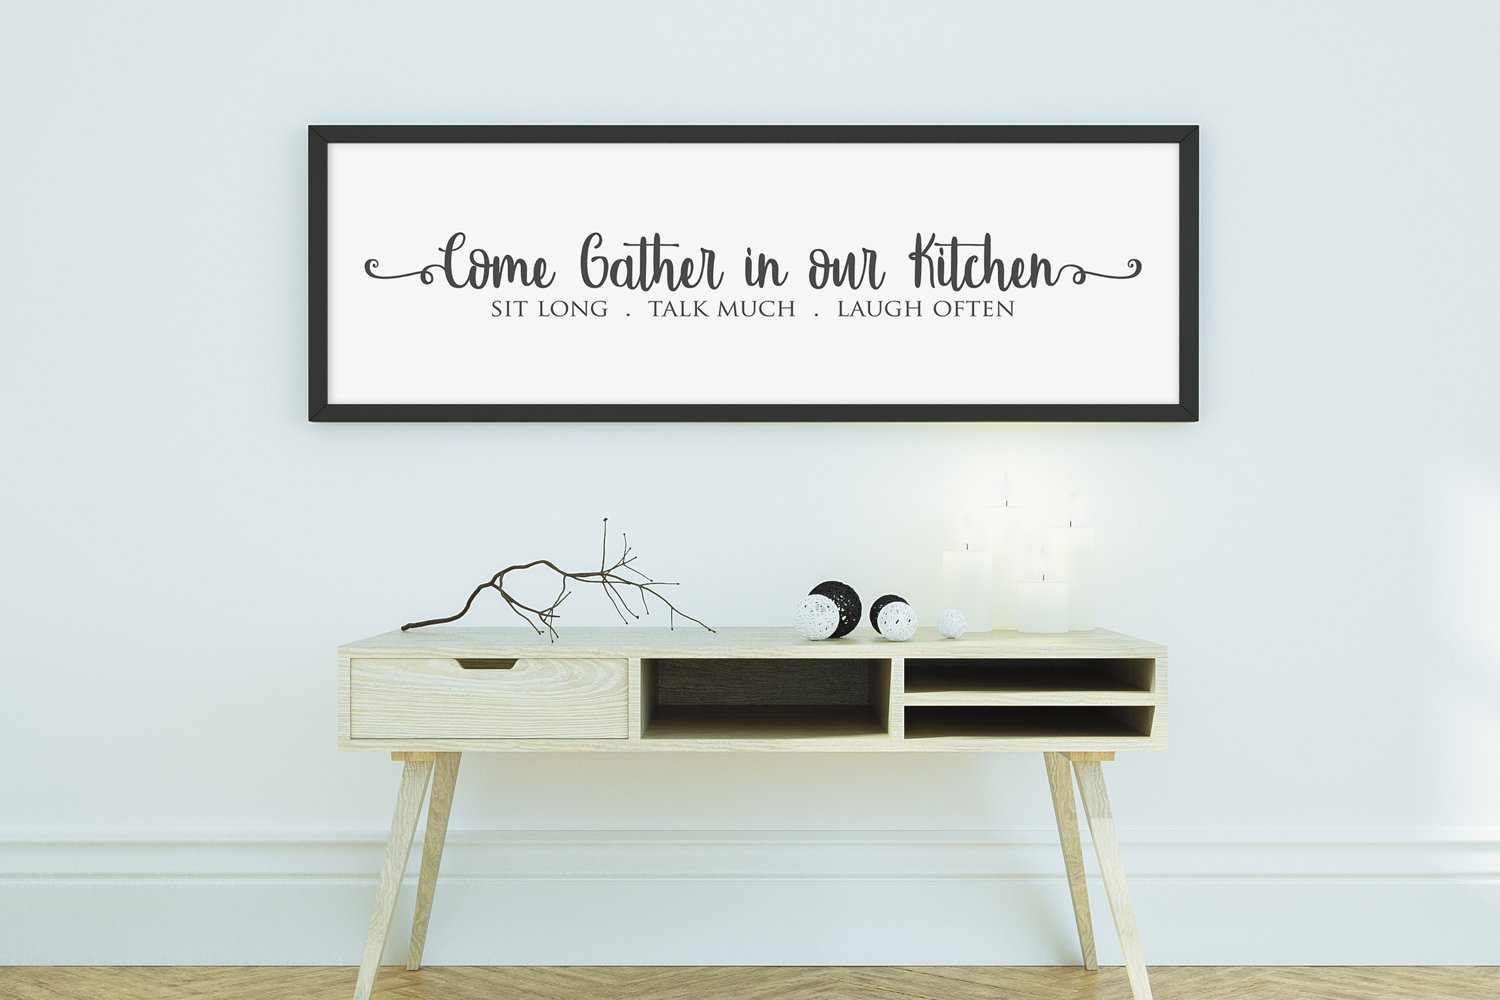 Stylish poster for kitchen.